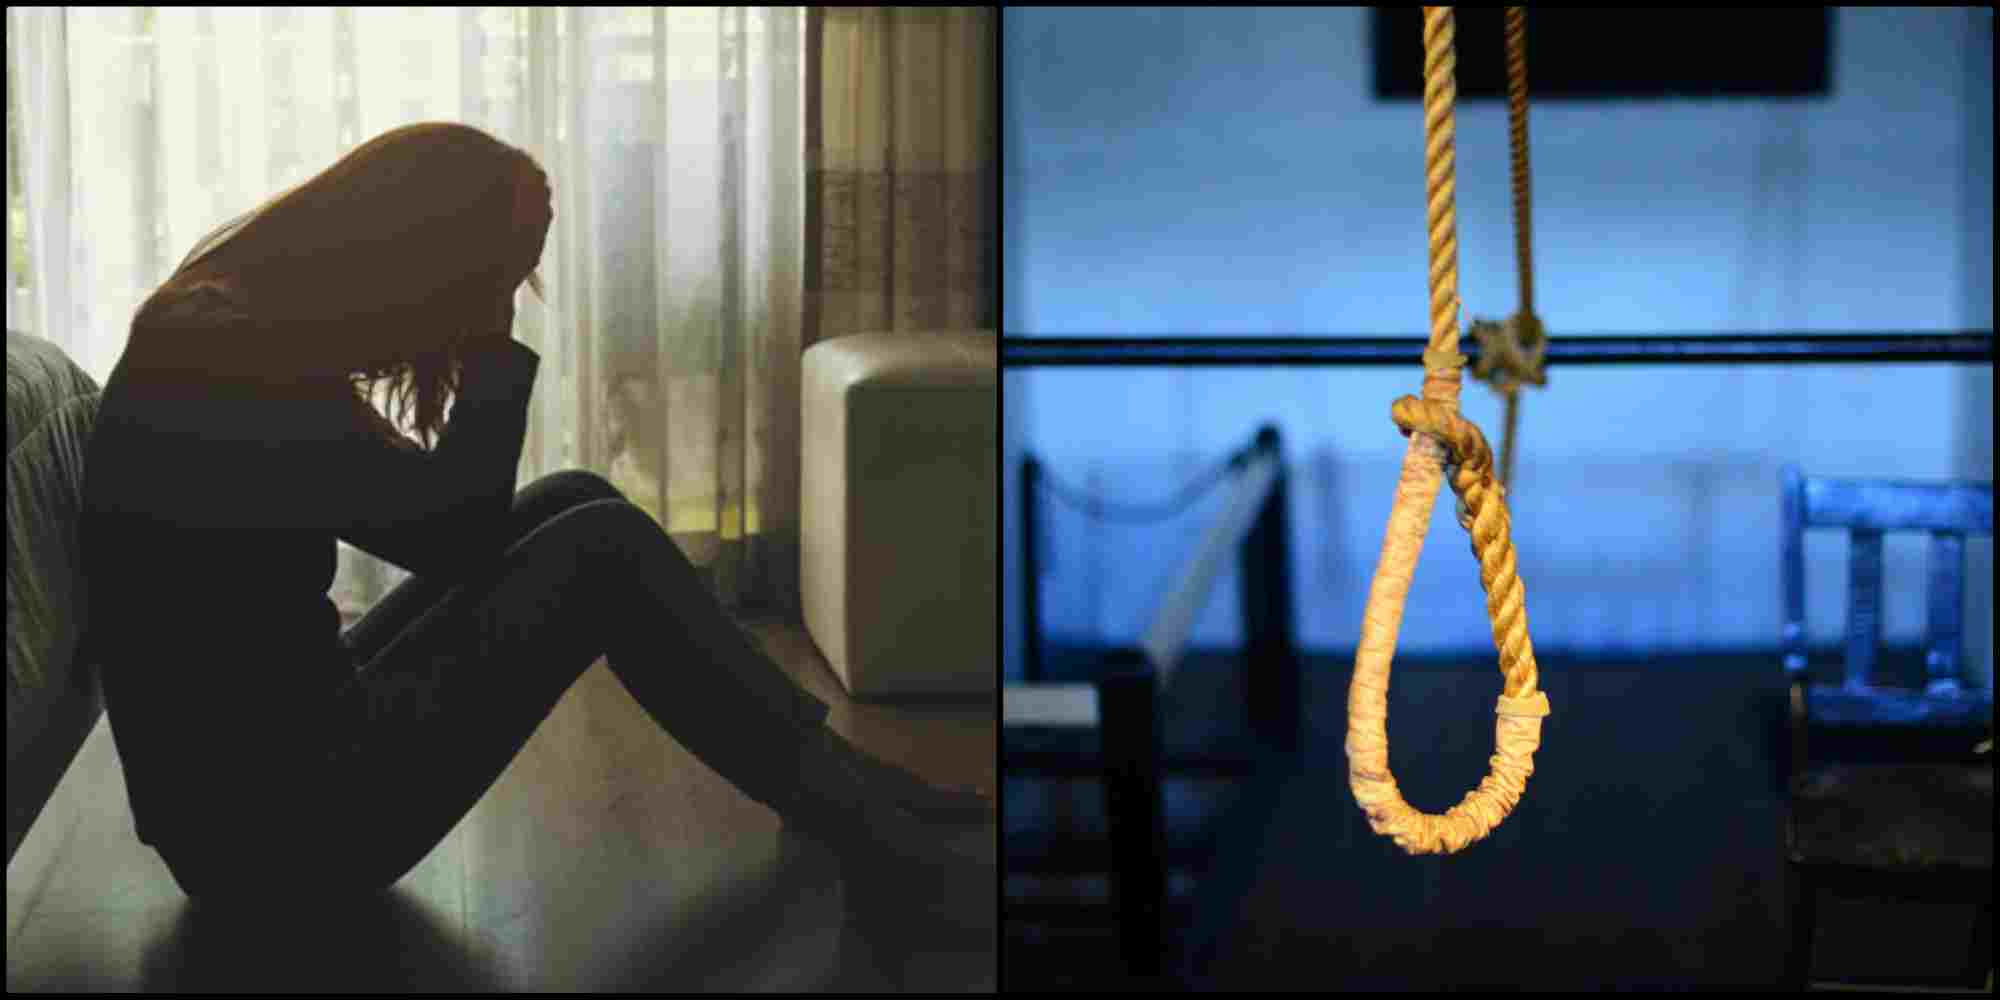 Tehri Garhwal News: Student commits suicide in Garhwal